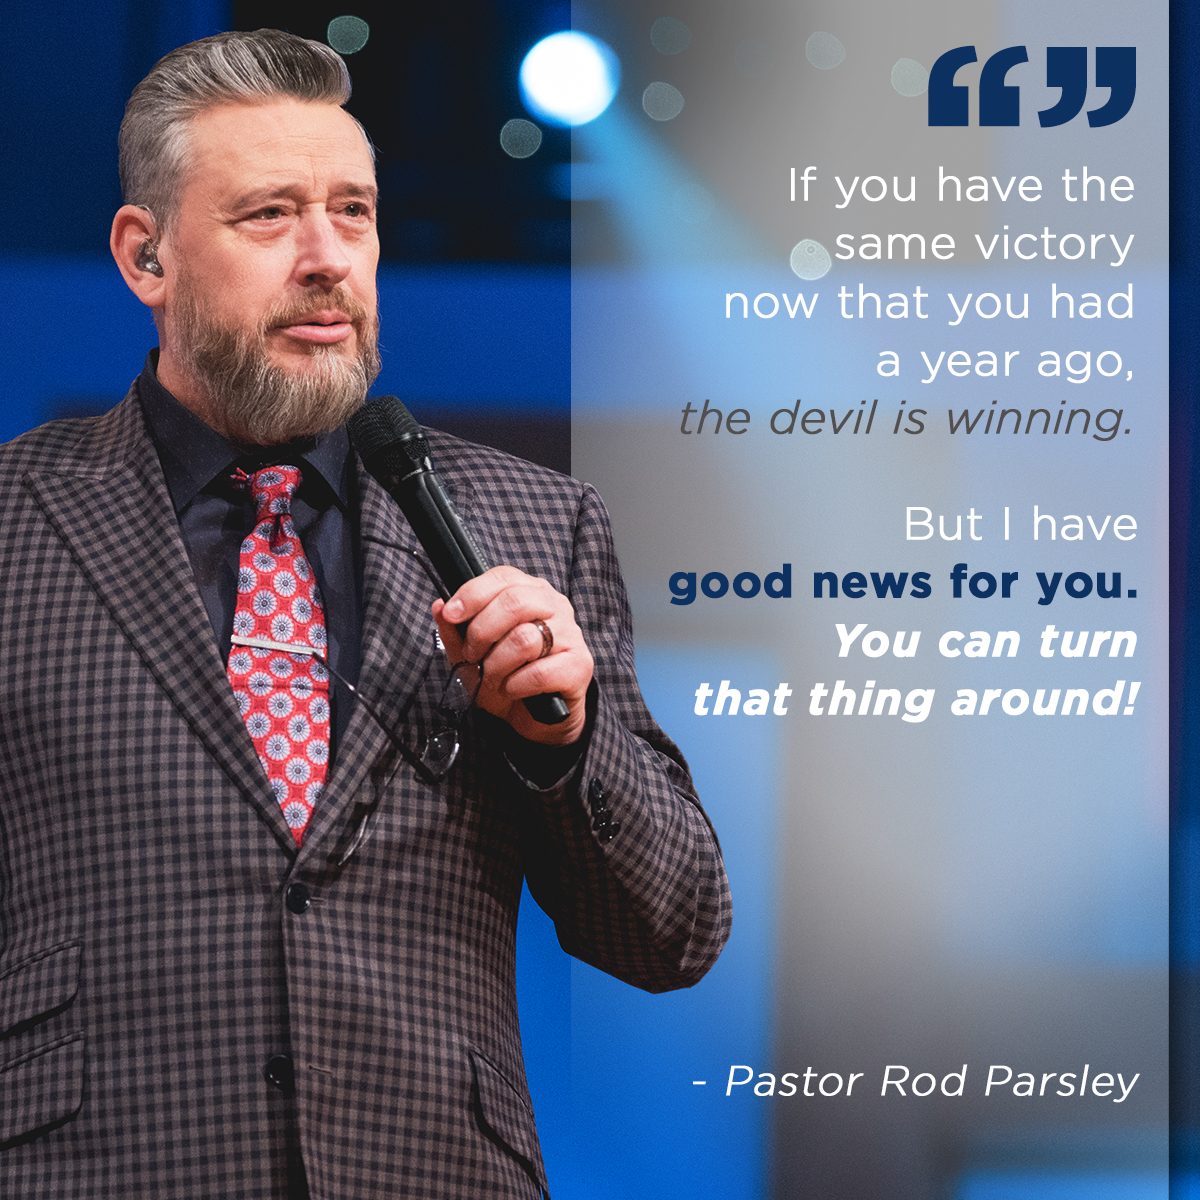 “If you have the same victory now that you had a year ago, the devil is winning. But I have good news for you. You can turn that thing around!” – Pastor Rod Parsley